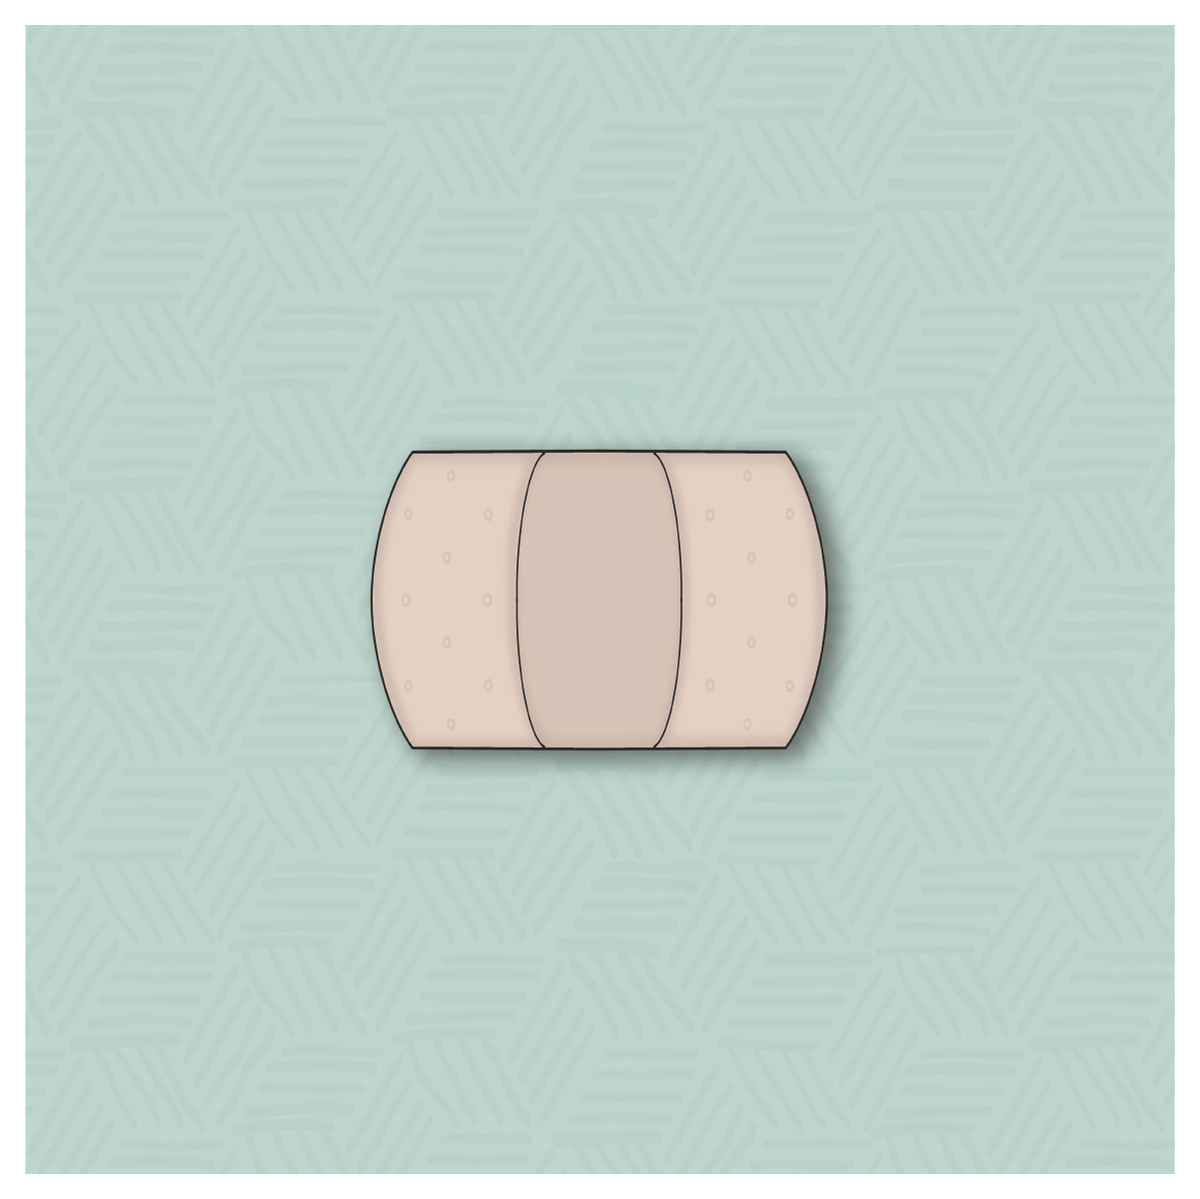 Chubby Simple Band-Aid Cookie Cutter